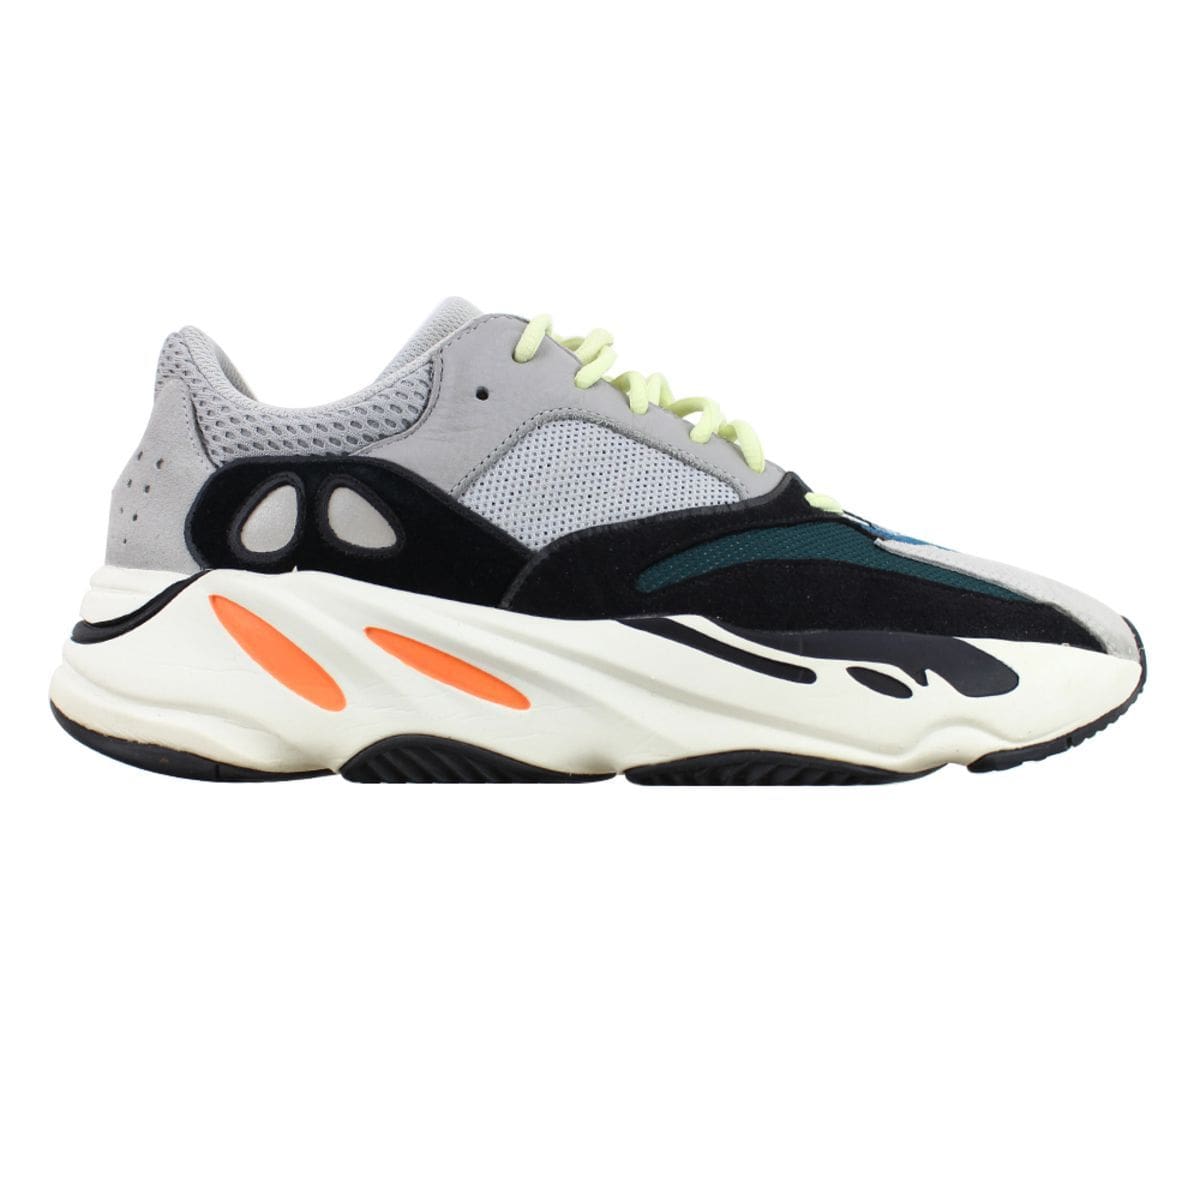 Adidas x Yeezy Boost 700 Wave Runners - SaruGeneral